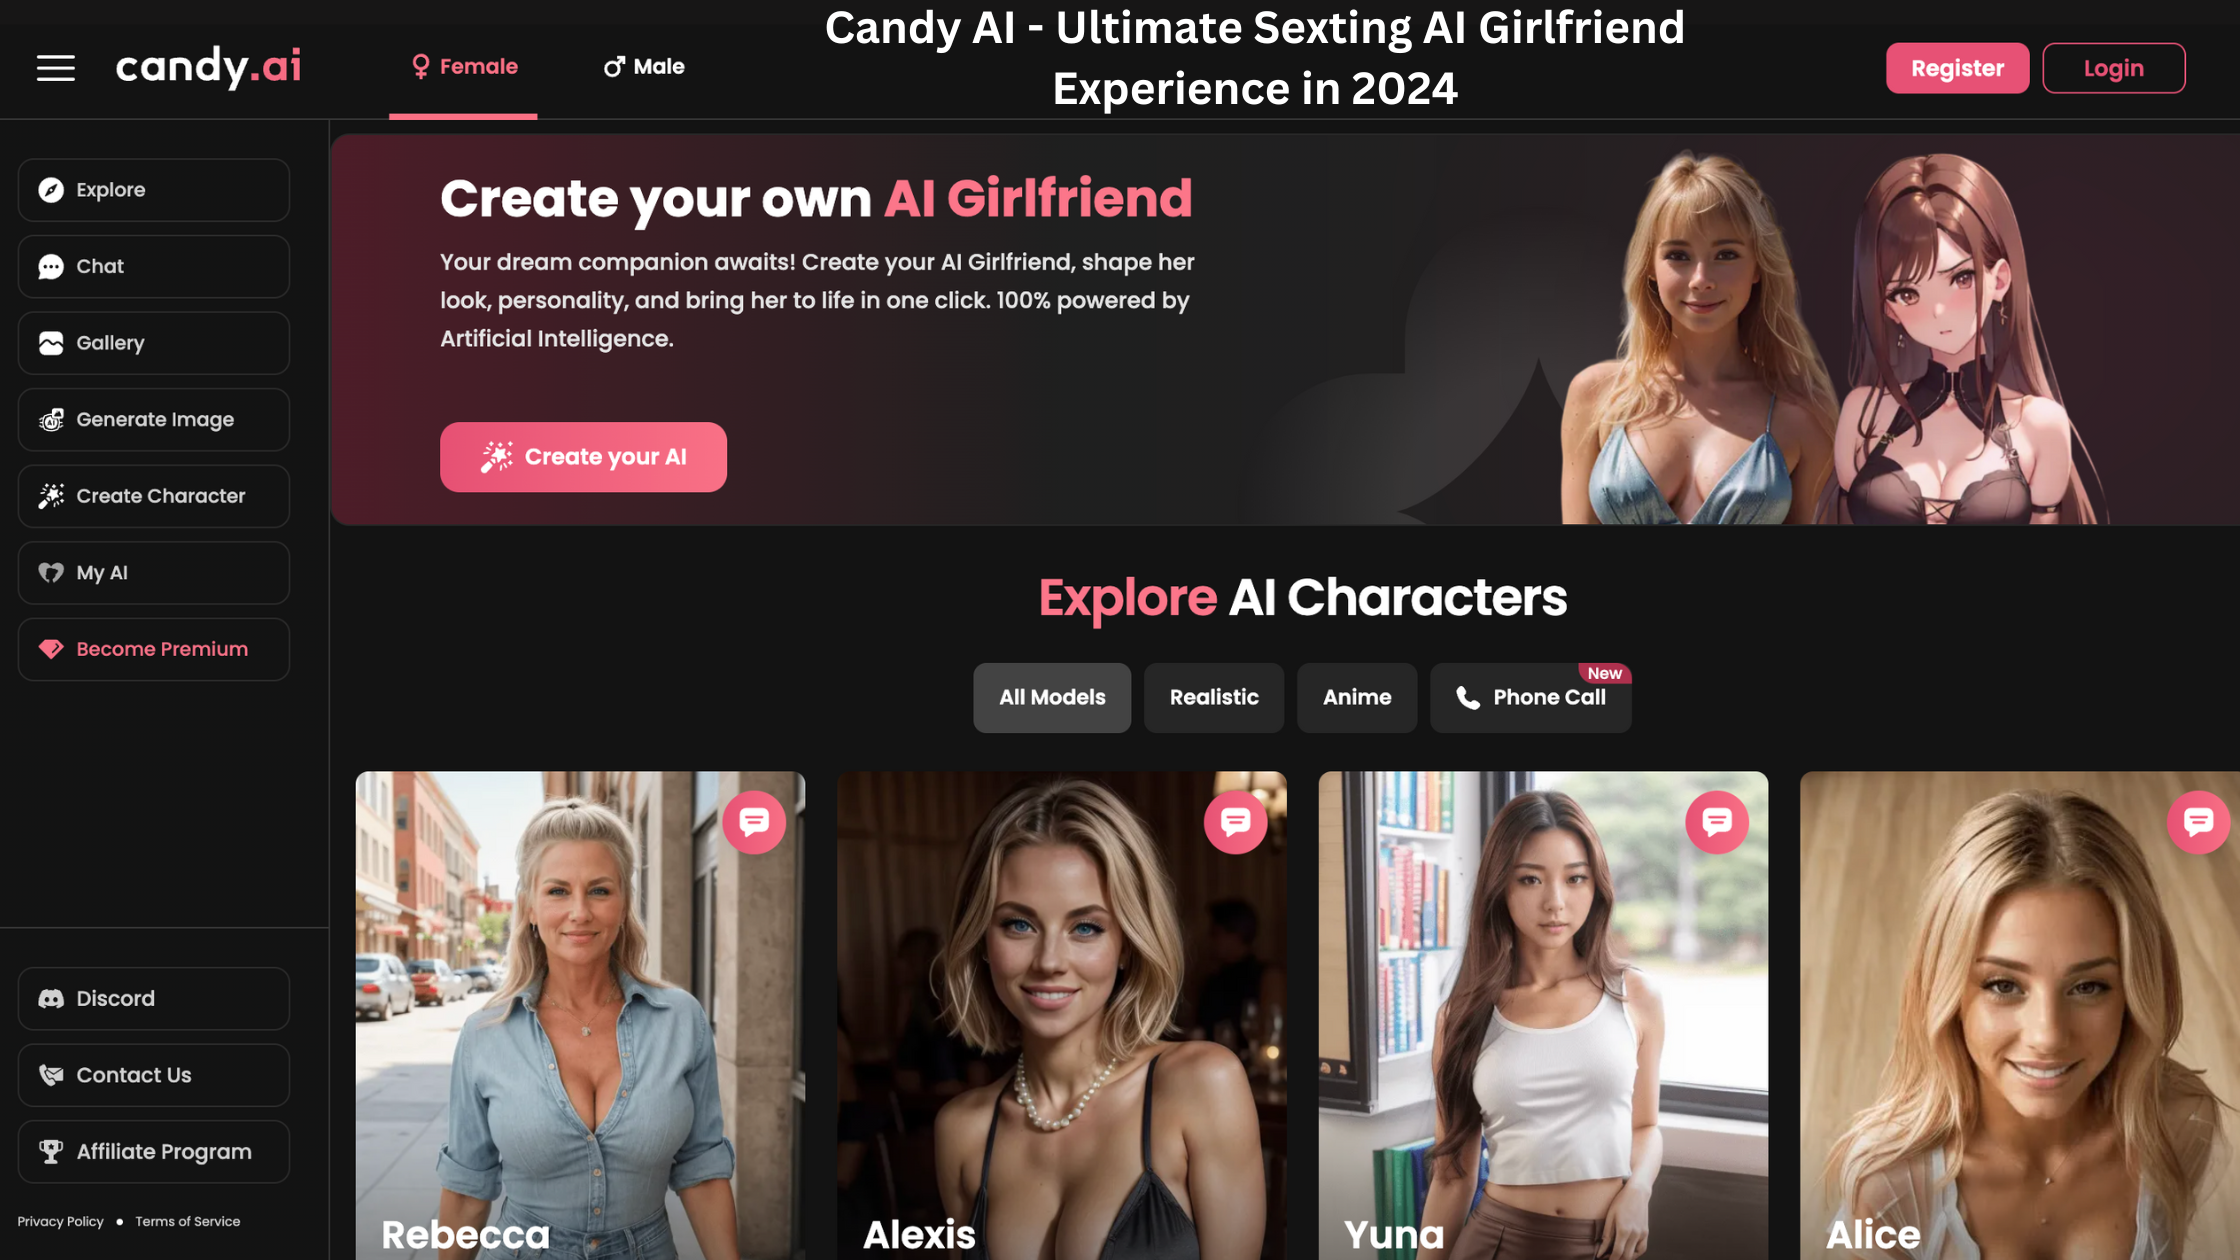 Candy AI - Ultimate Sexting AI Girlfriend Experience 2024